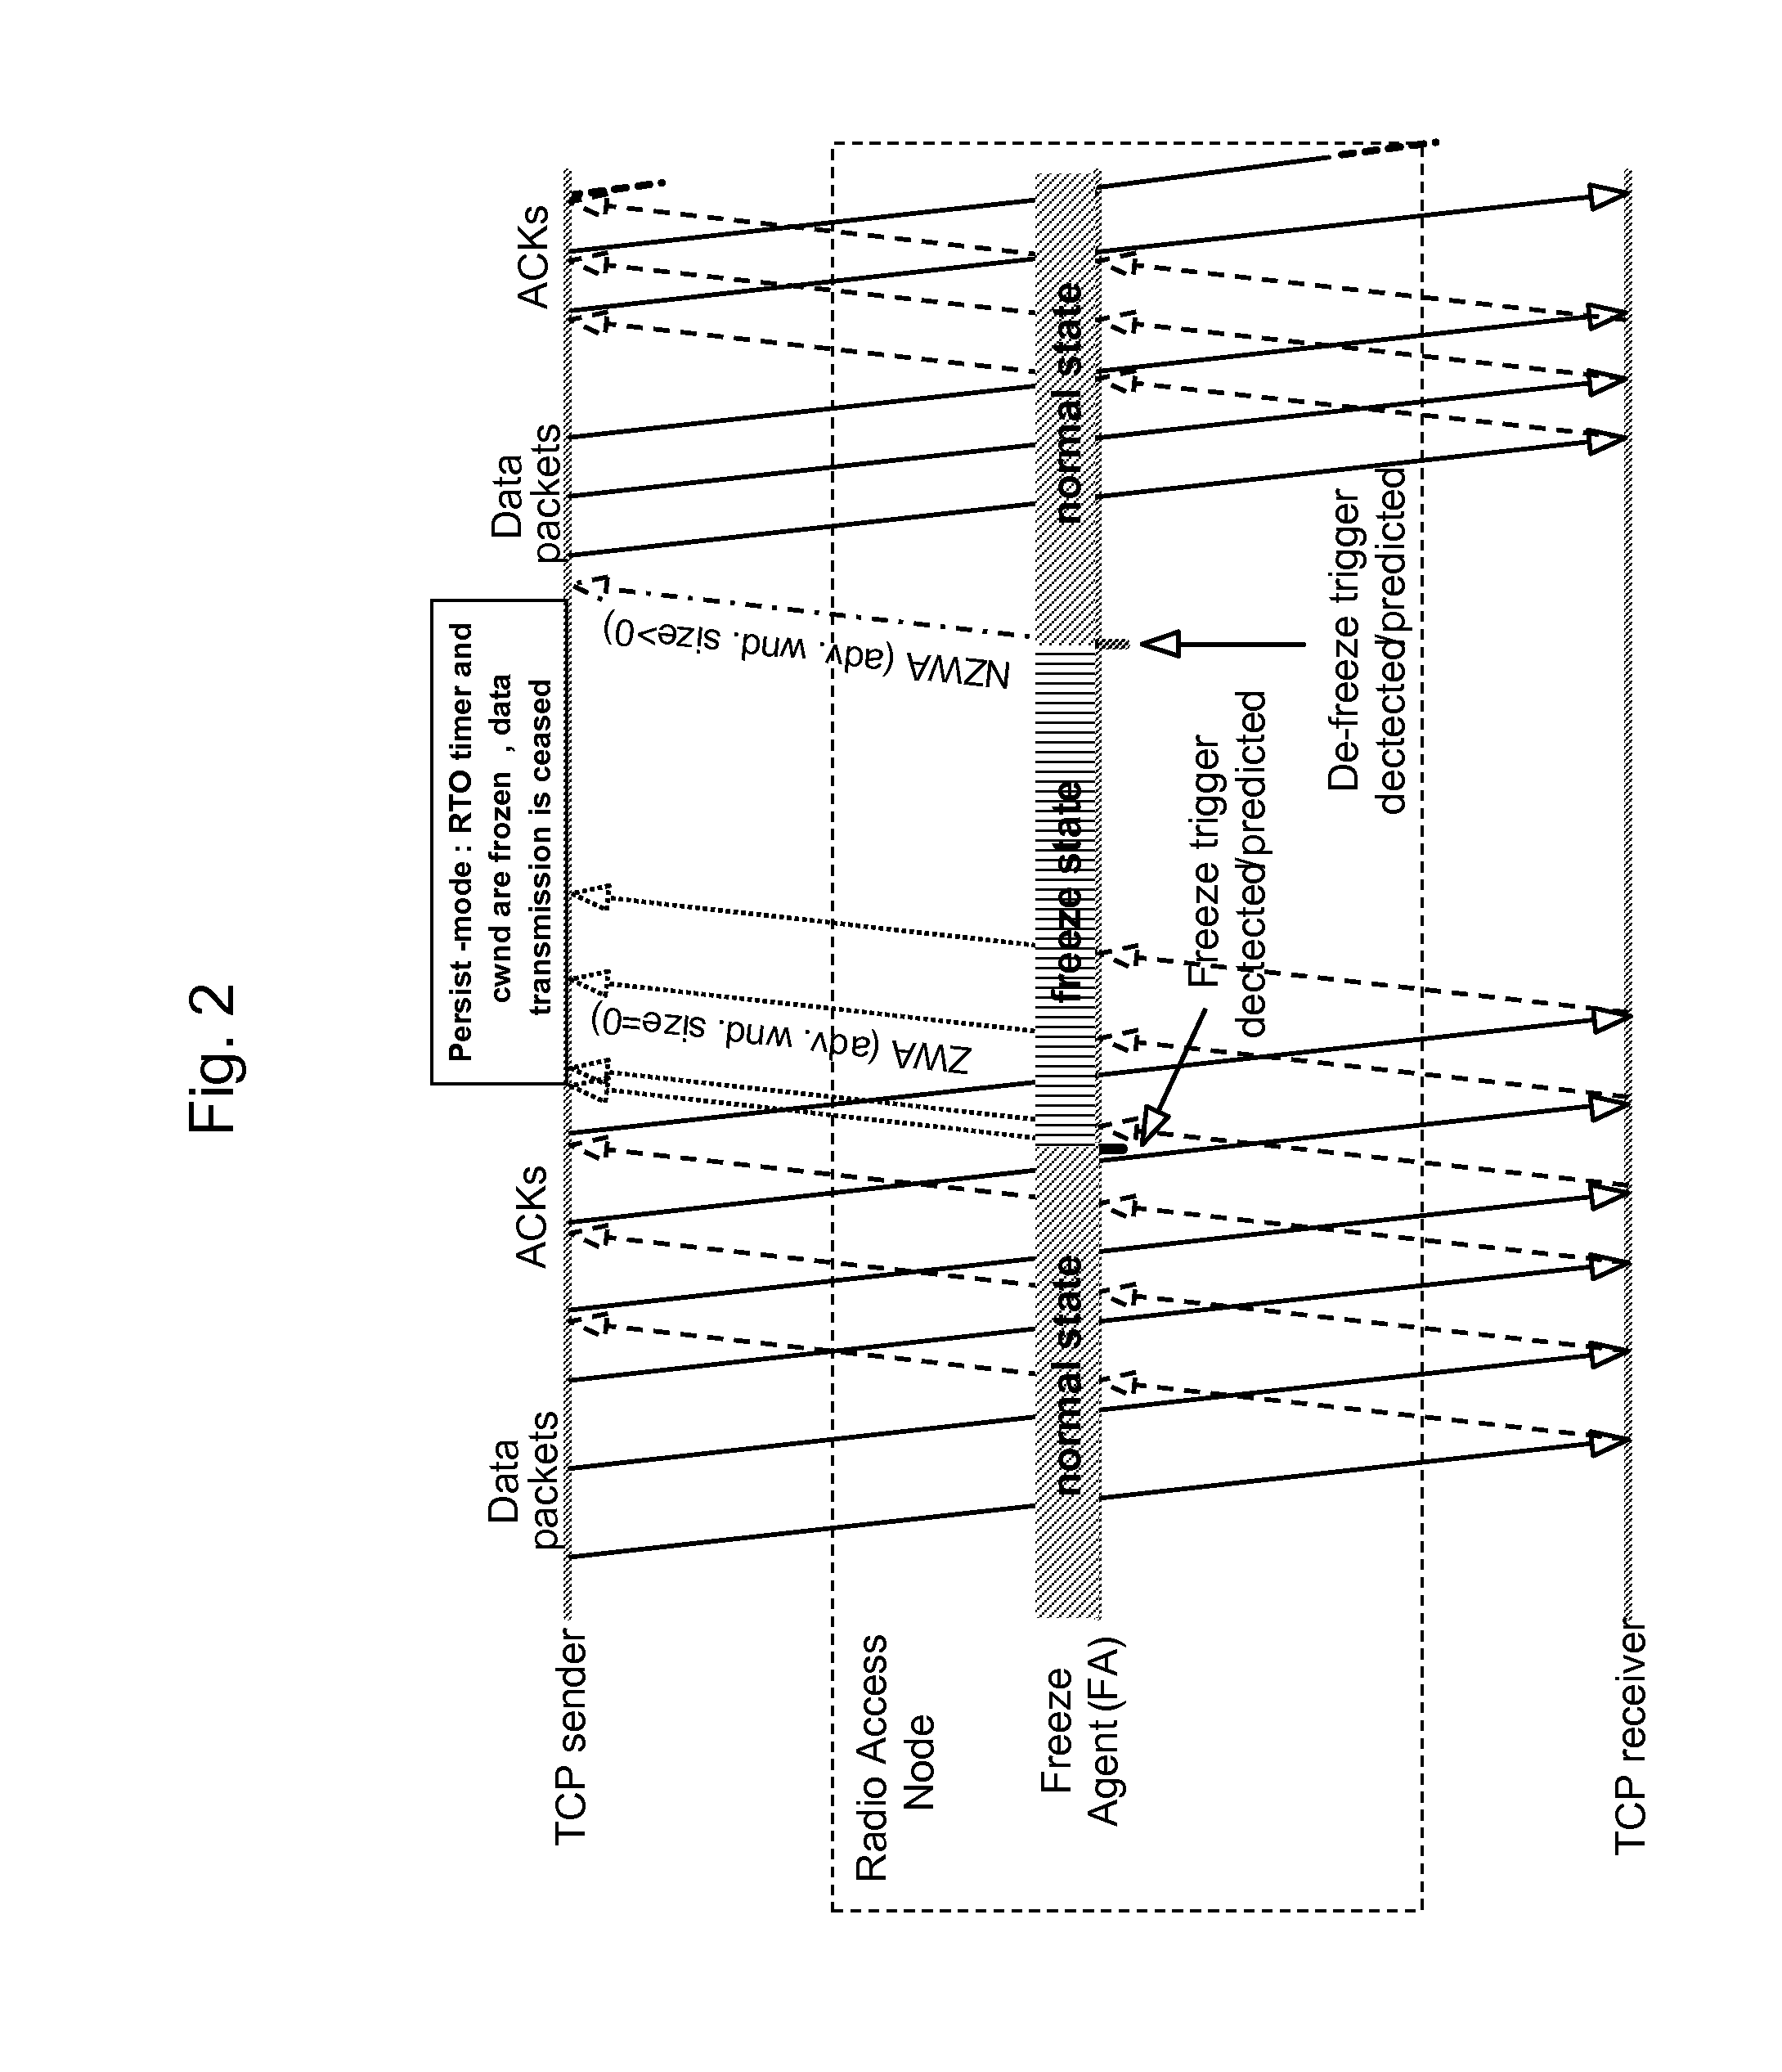 Method and Apparatus to Improve TCP Performance in Mobile Networks